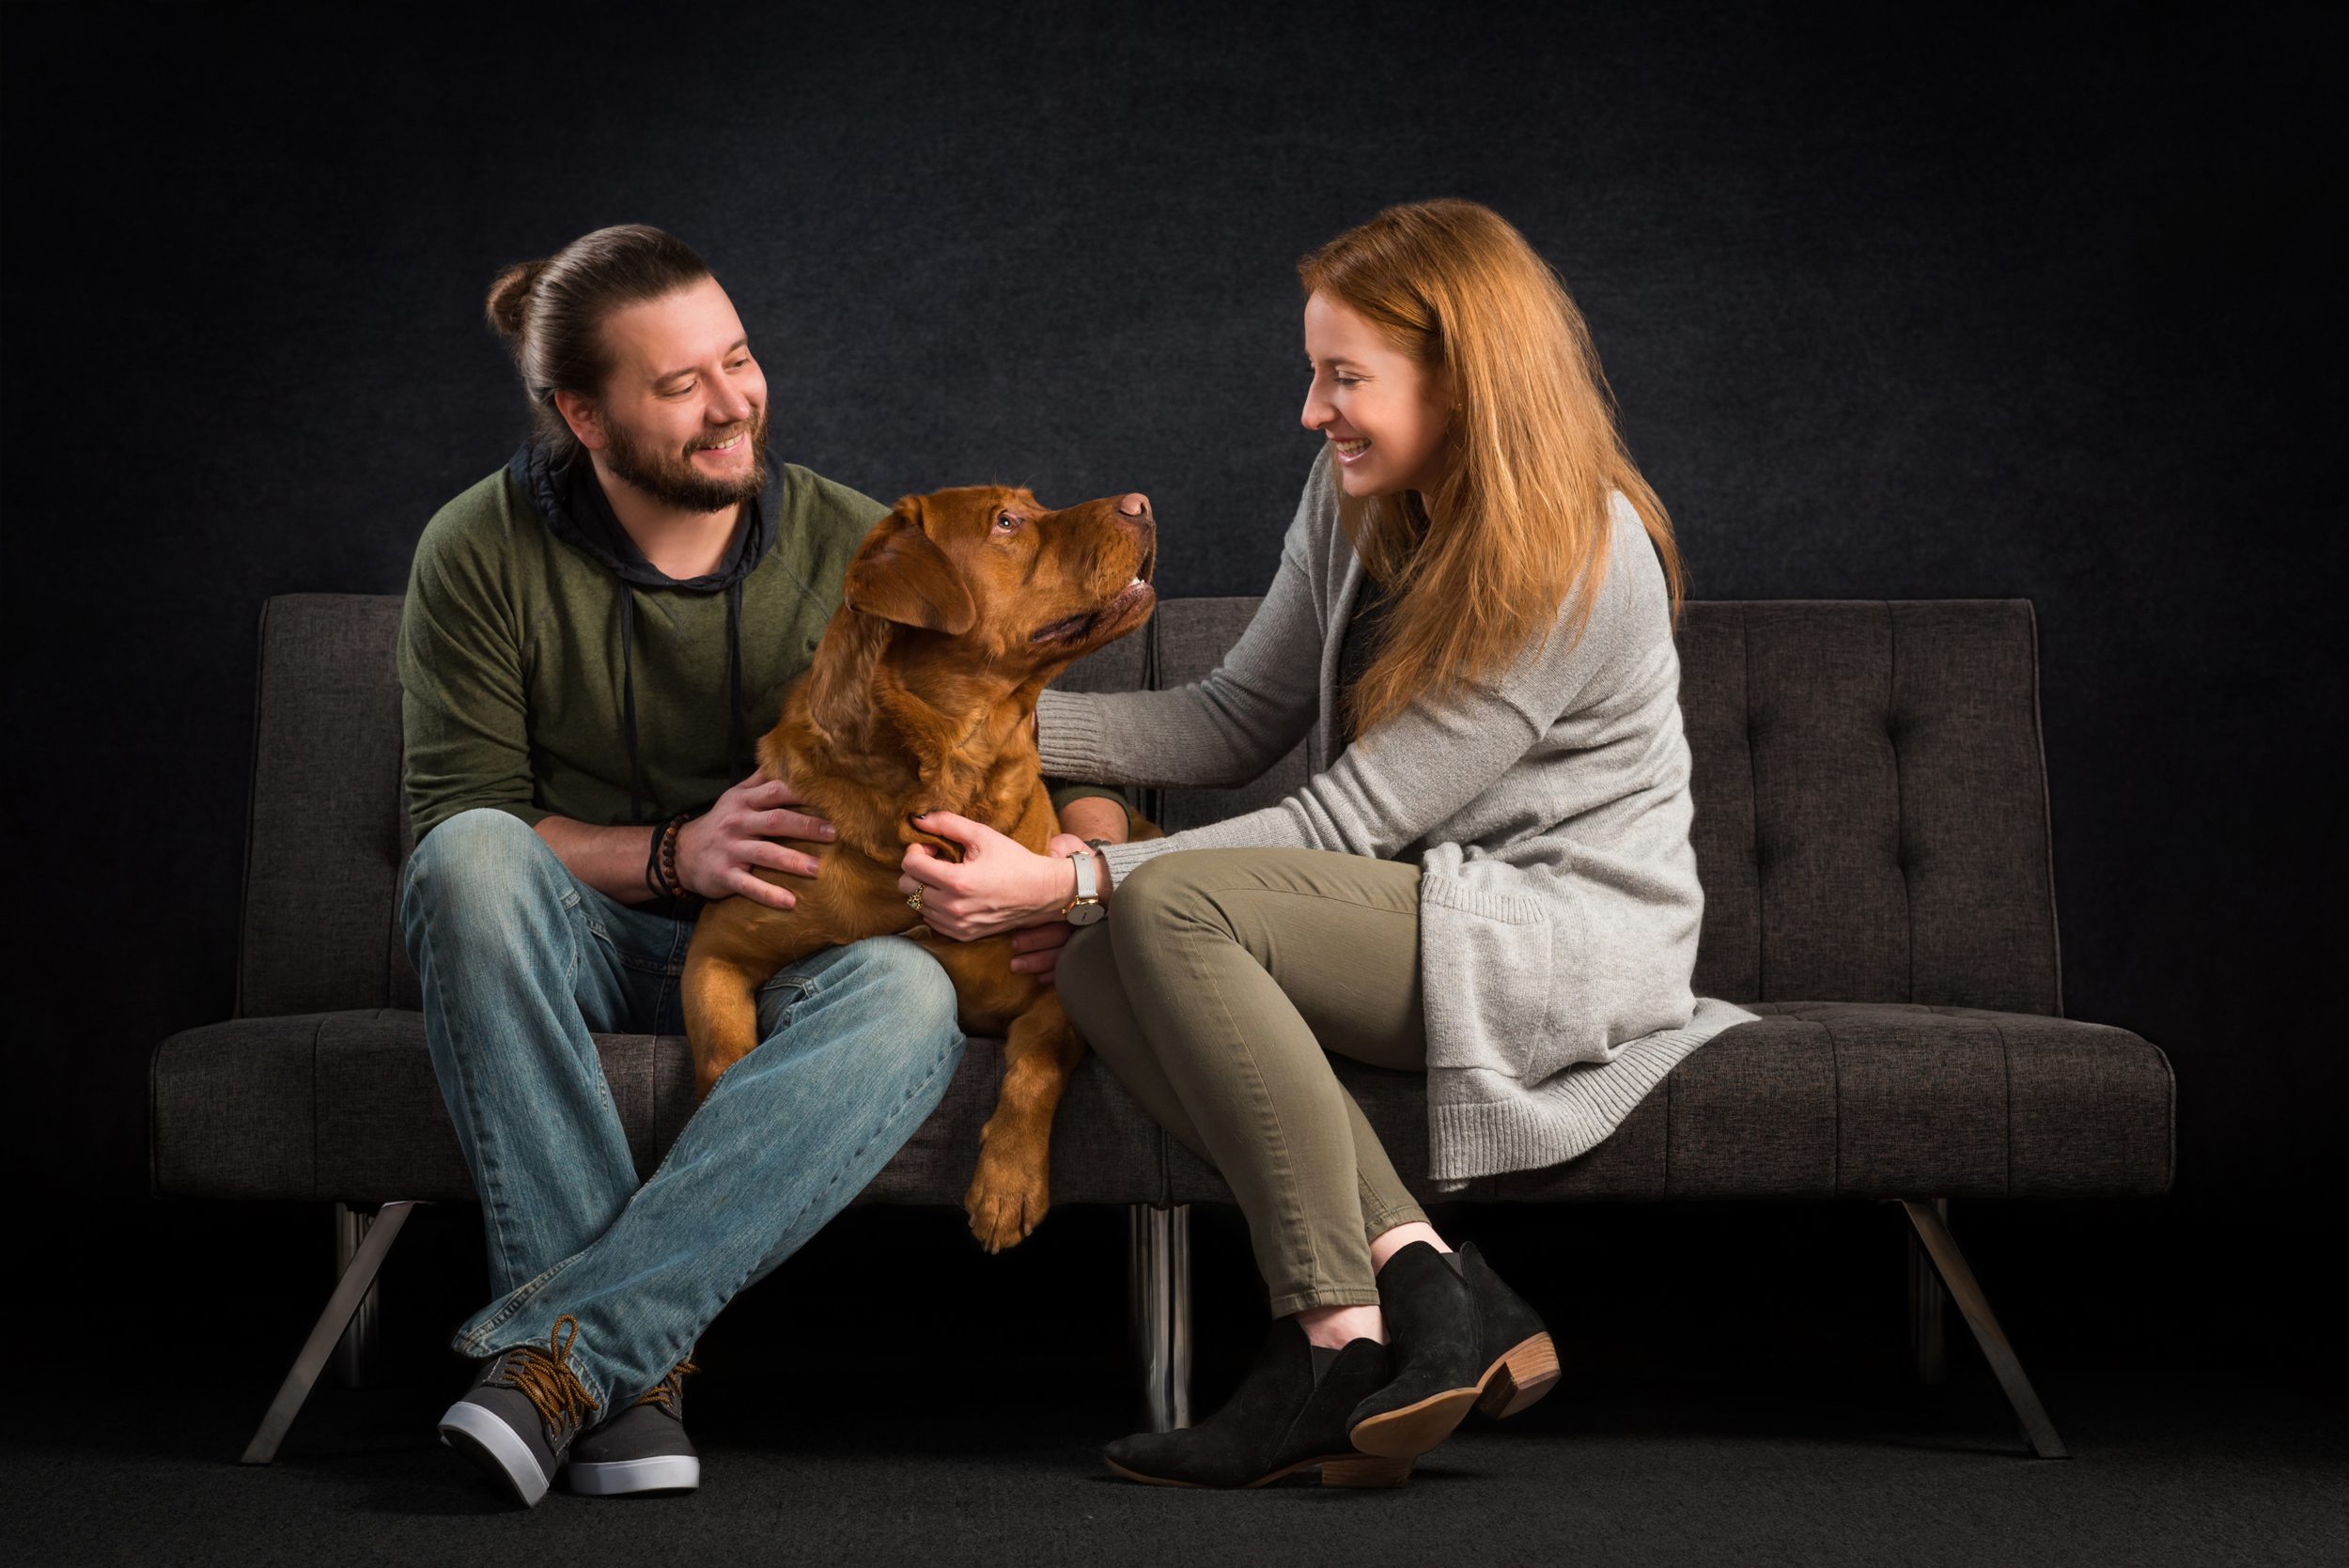 Pet parents of dog Nershi cozying up together on a couch during their photoshoot. Photographed by Candice Cusic